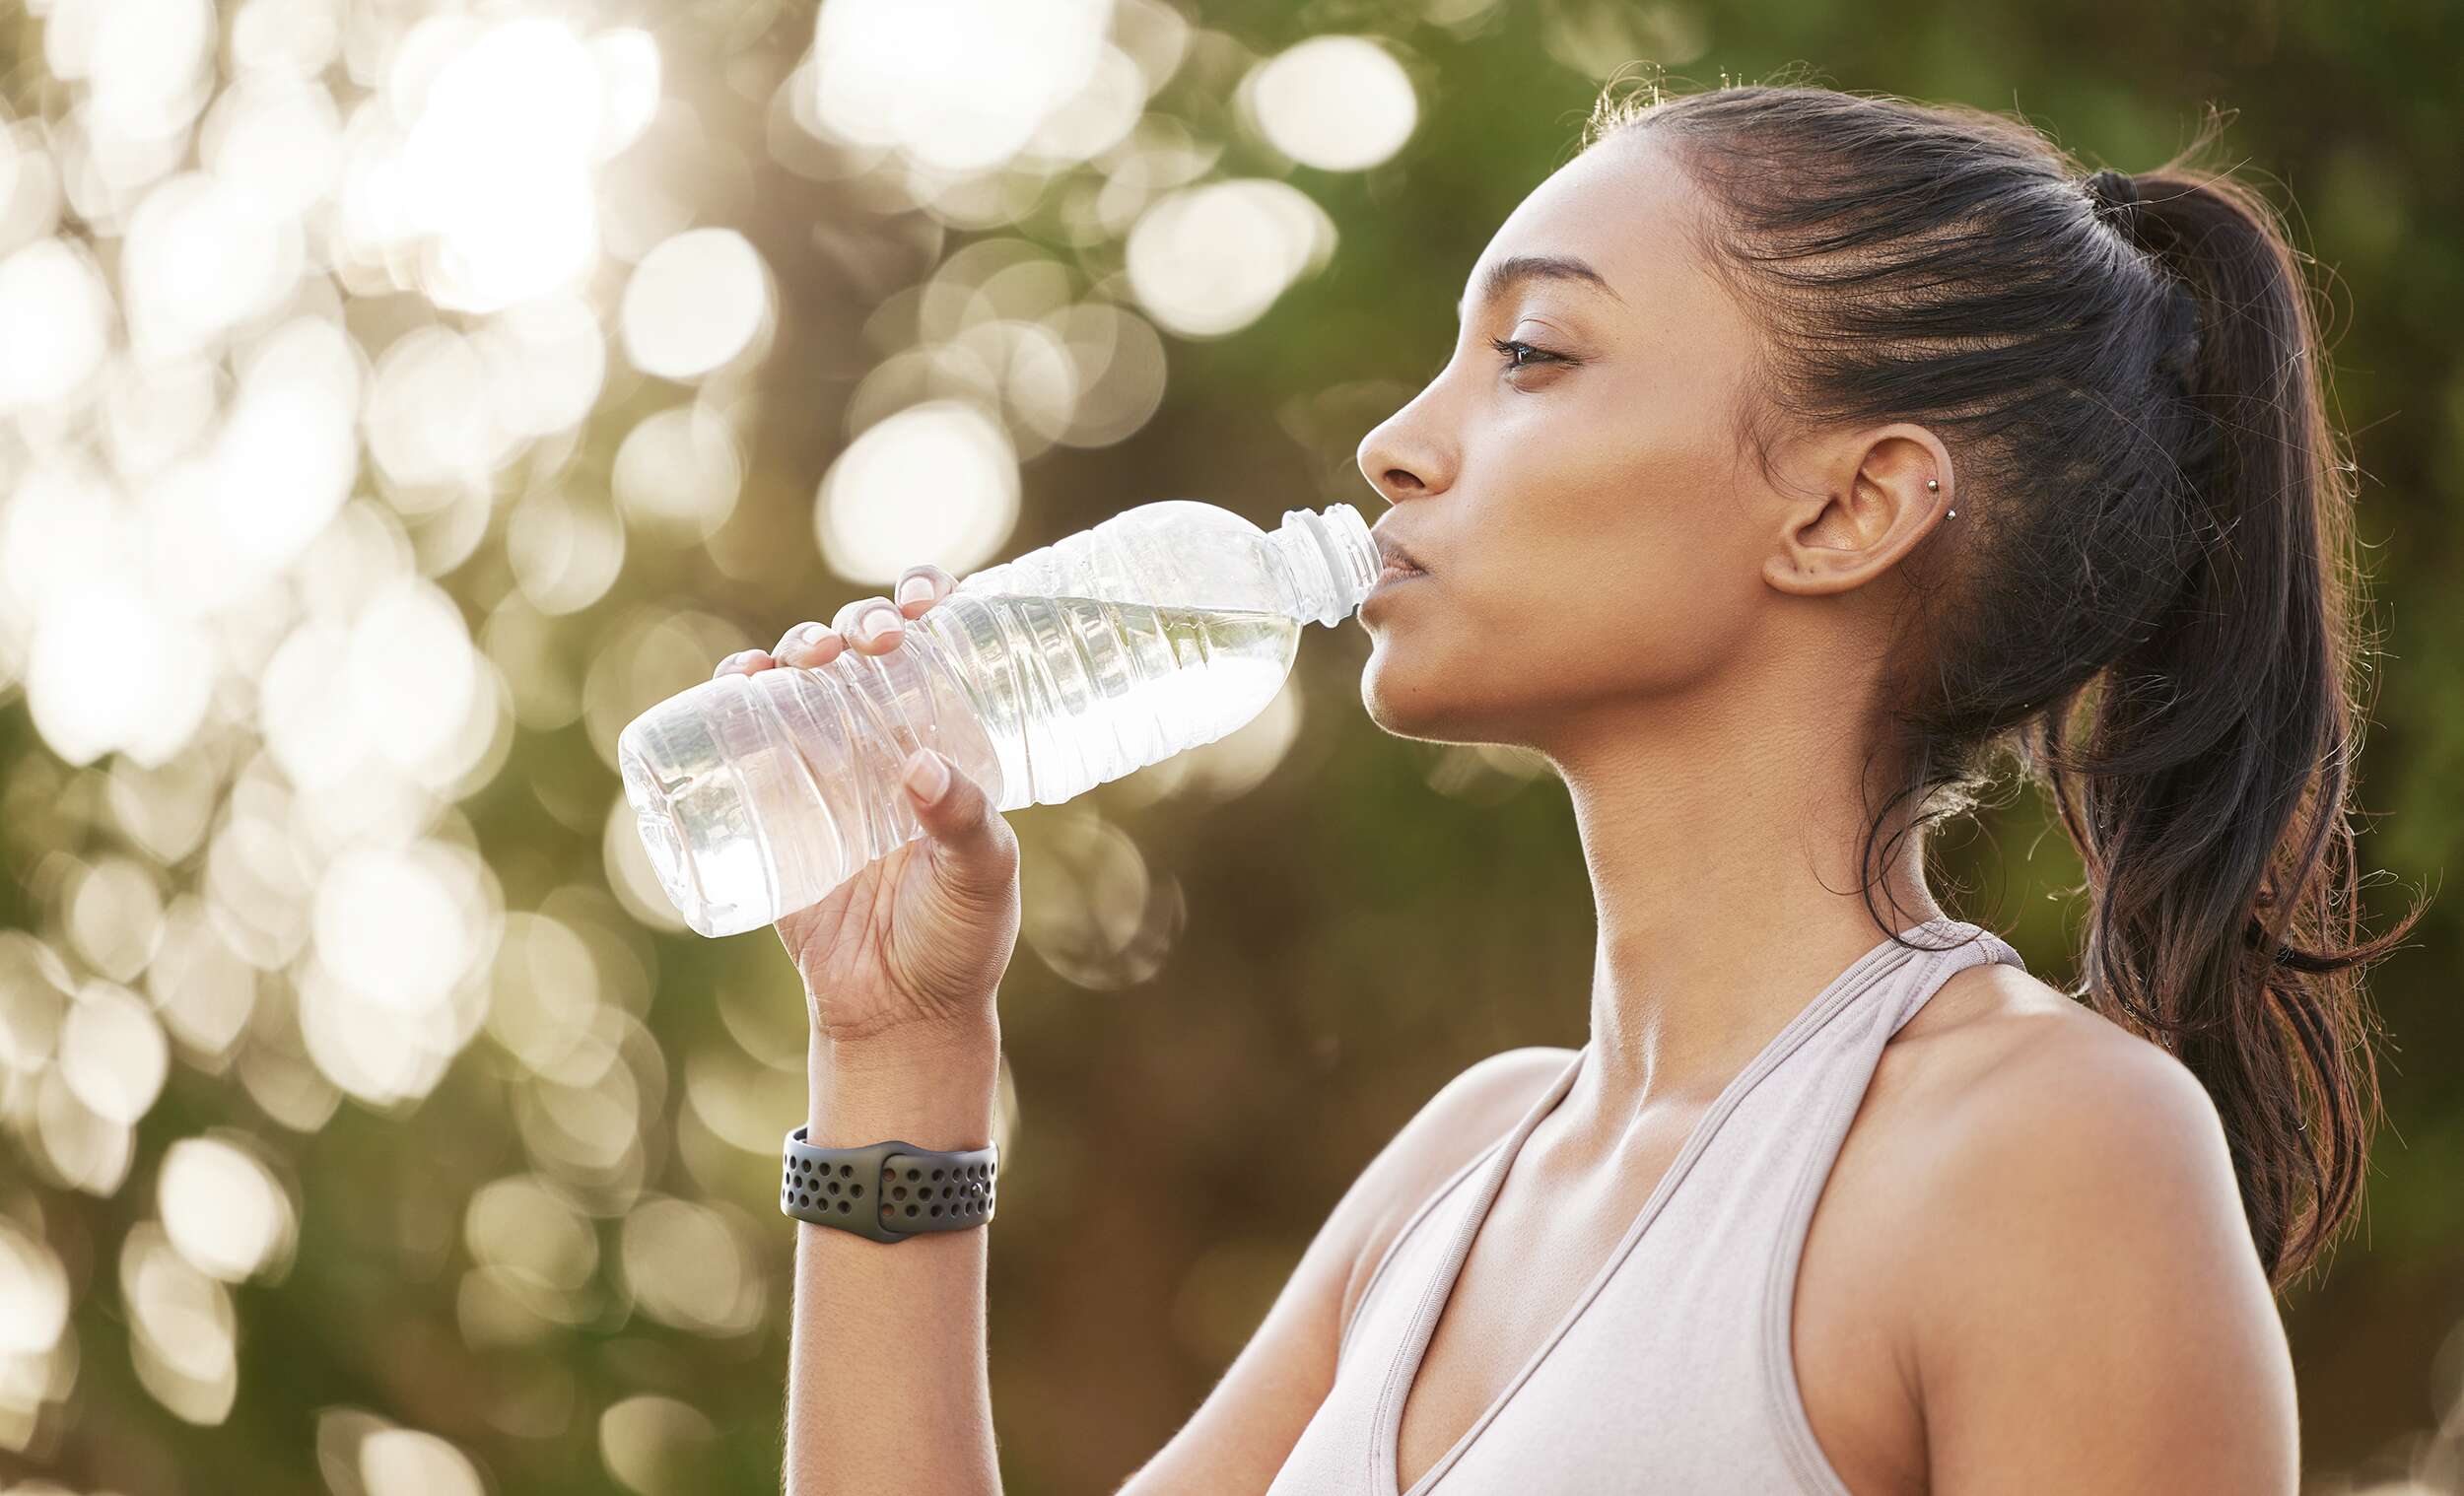 Never Drink Water During These Times No Matter How Thirsty You Are (Opinion)